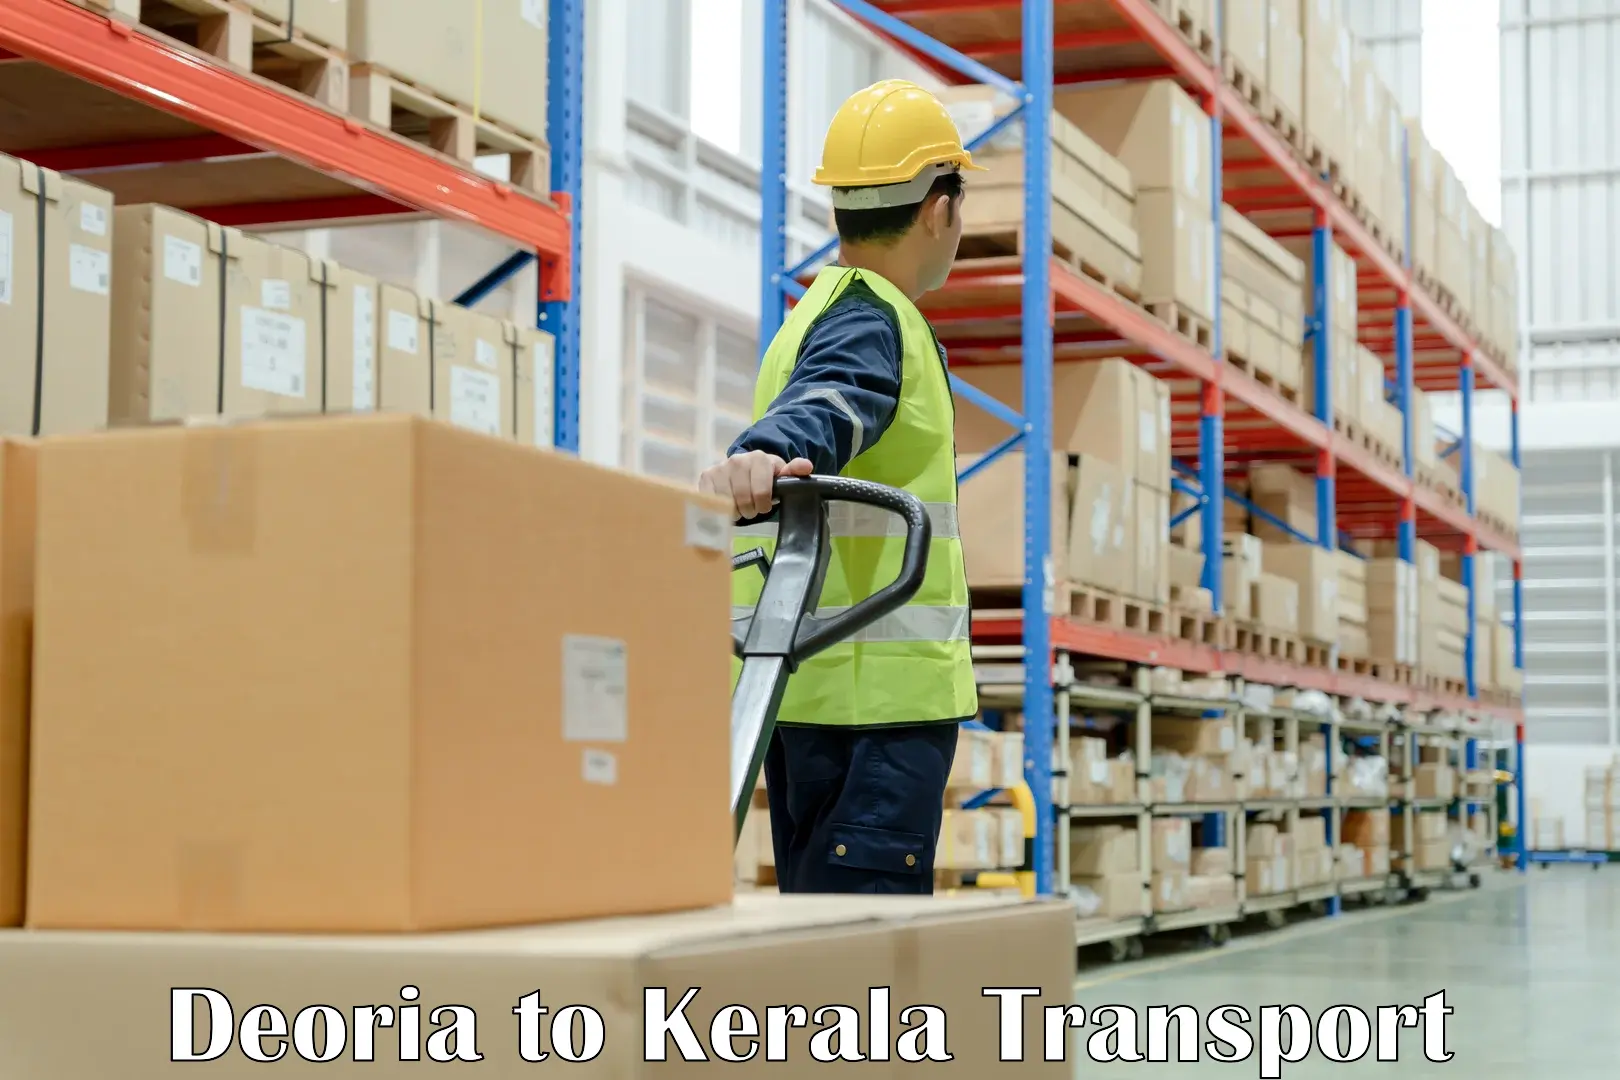 Nationwide transport services Deoria to Koyilandy